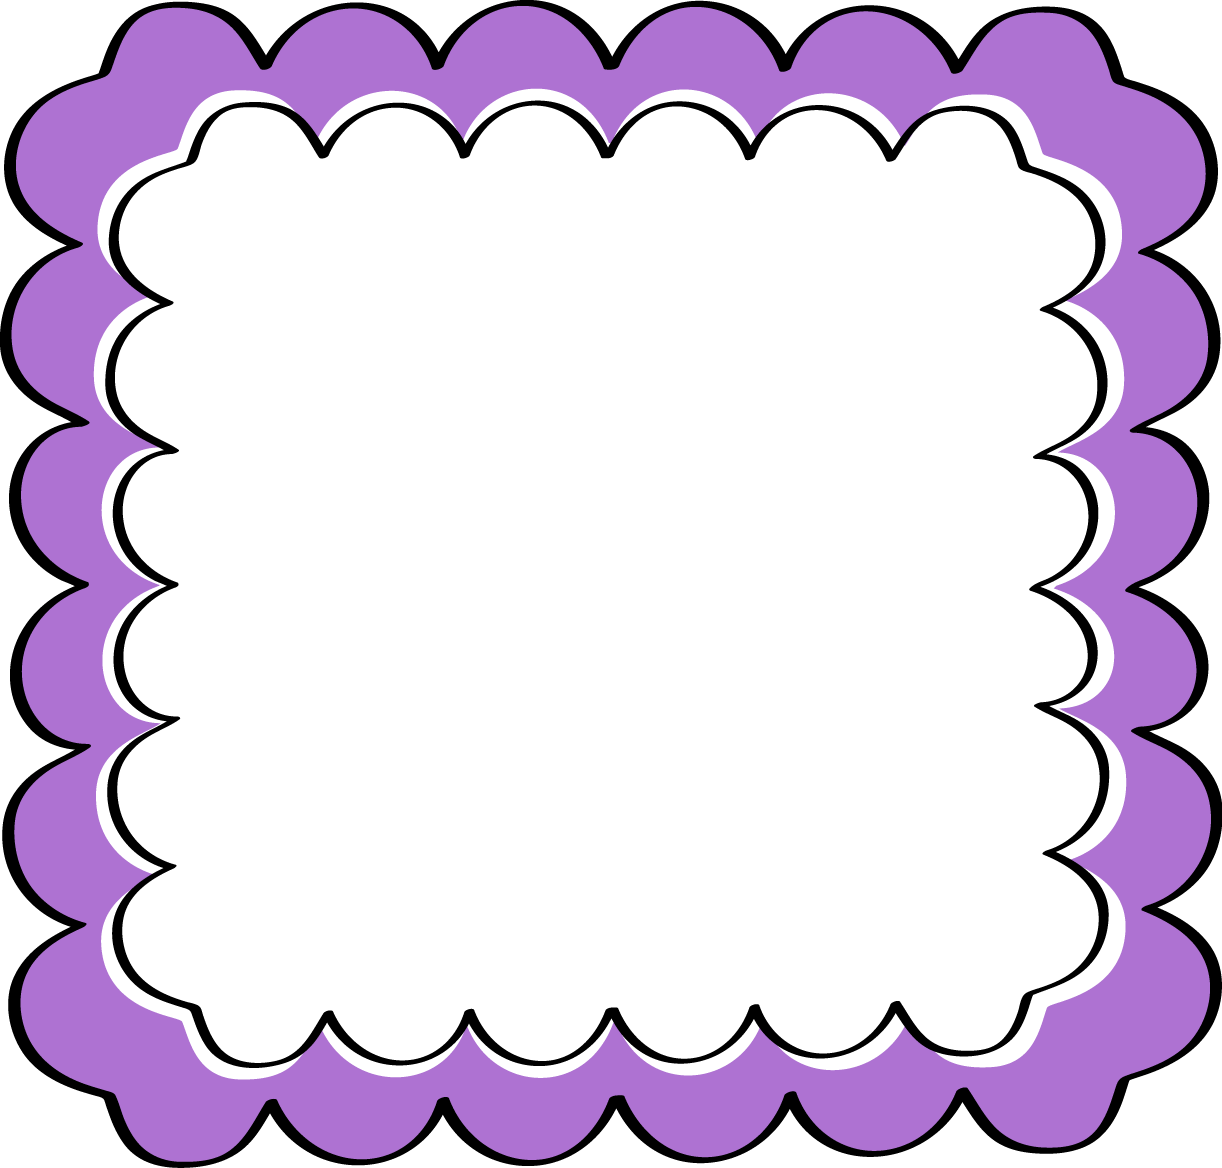 clipart frames and borders - photo #6